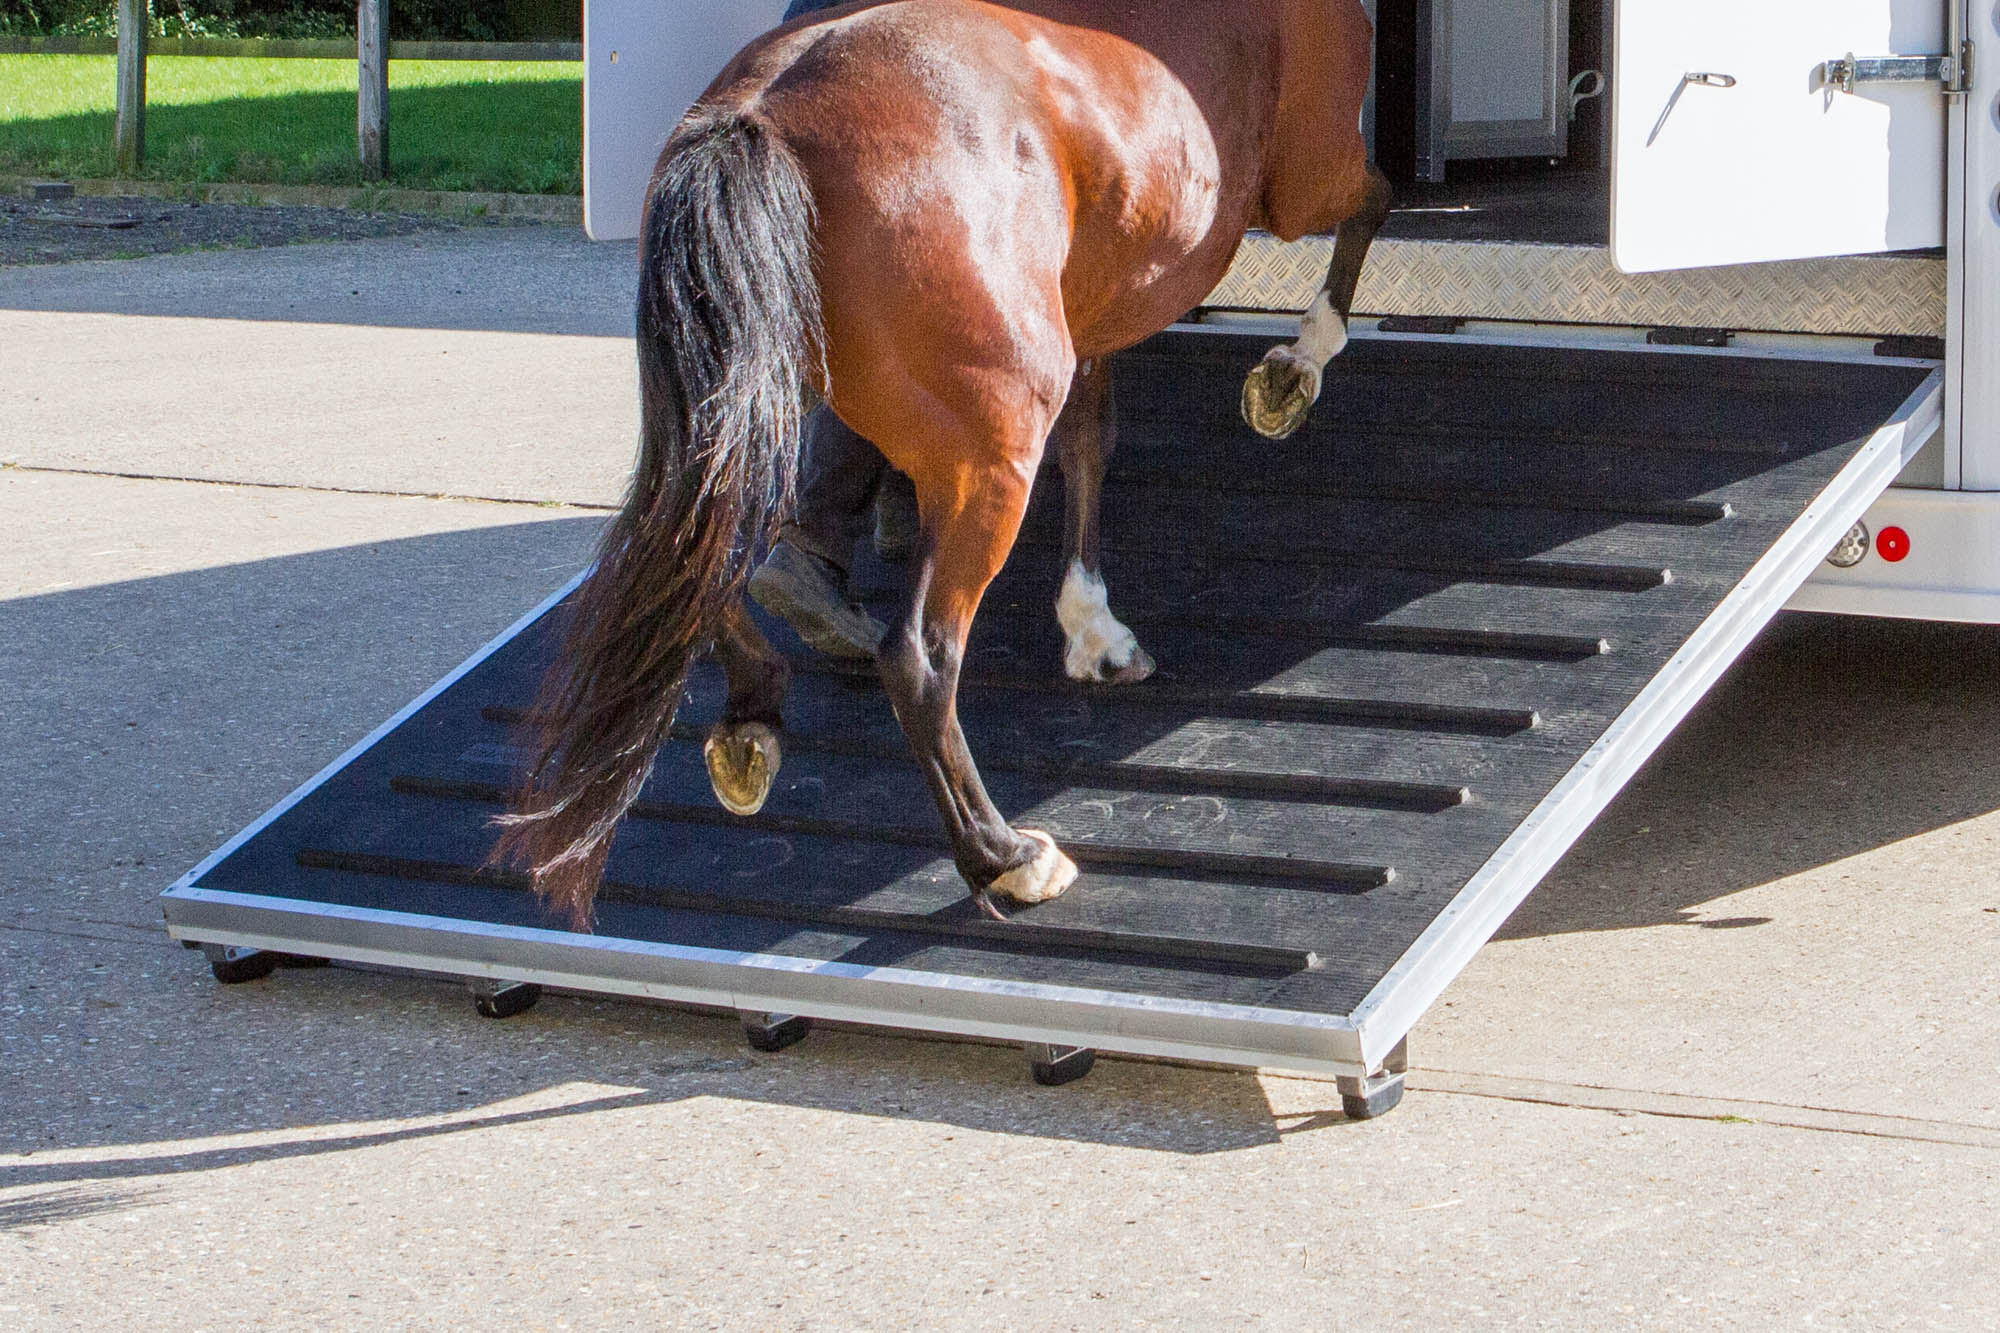 Horse welfare during transport in GB